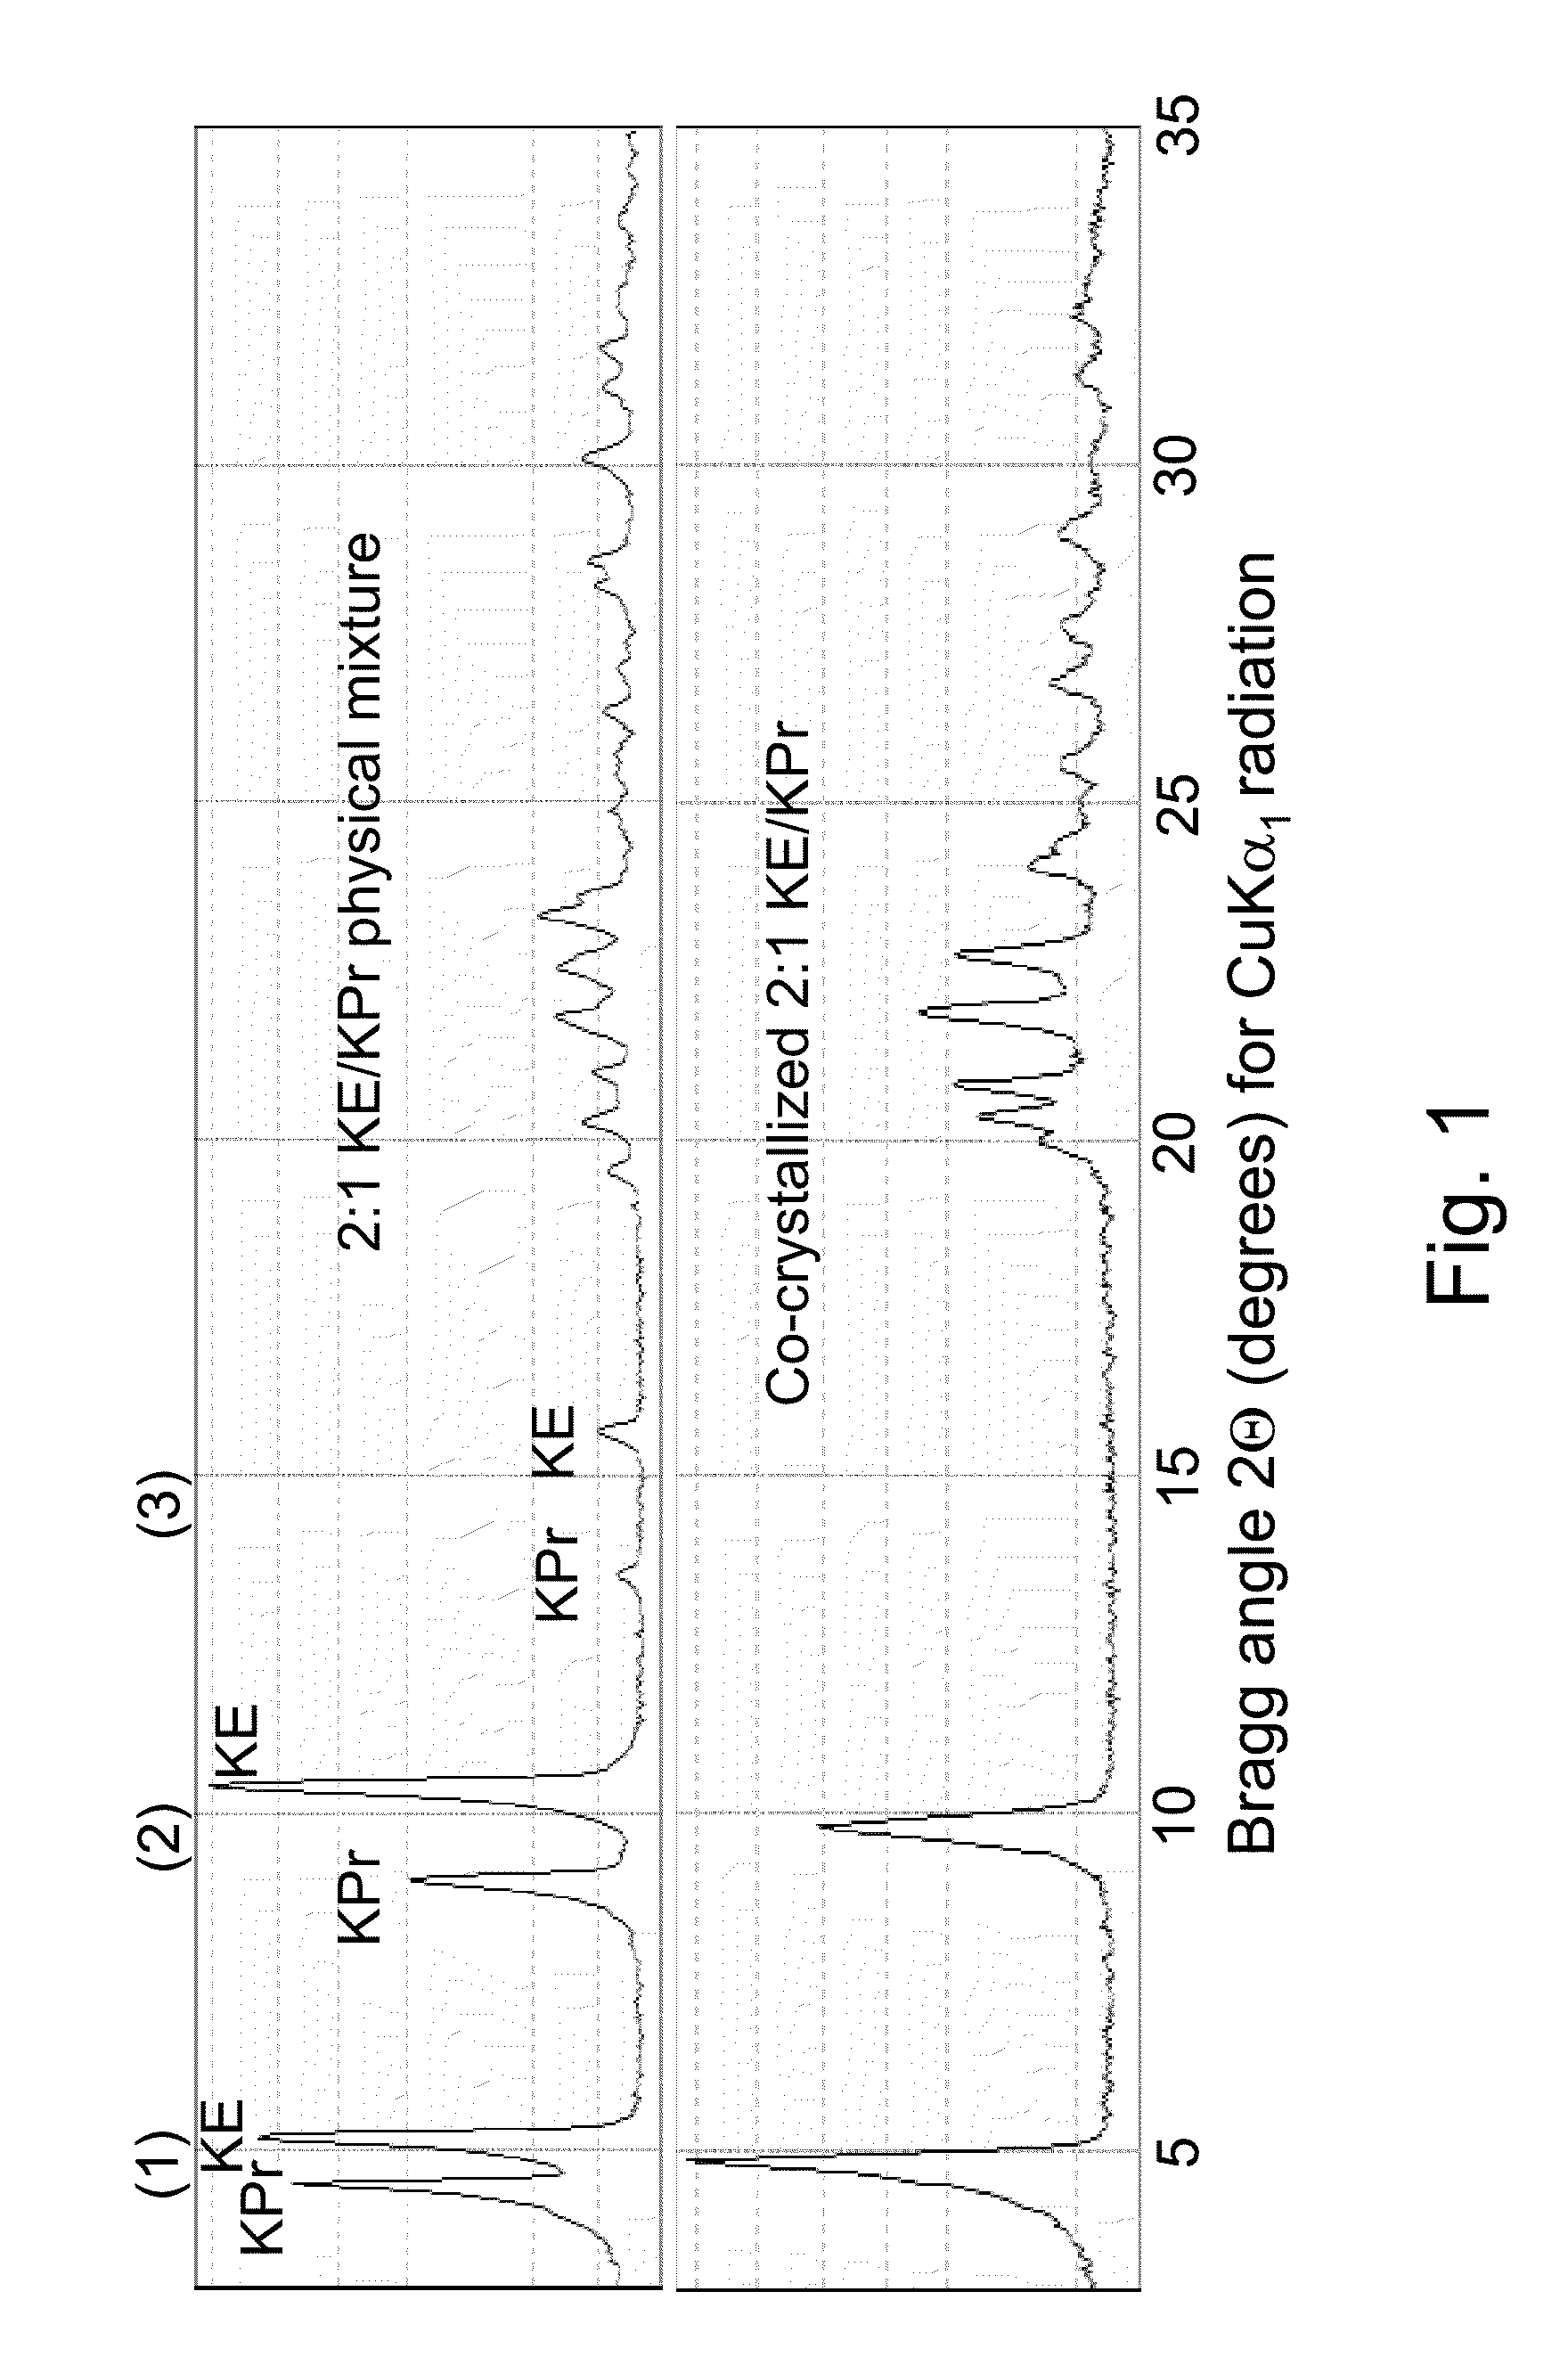 Co-crystallizable diacetylenic monomer compositions, crystal phases and mixtures, and related methods